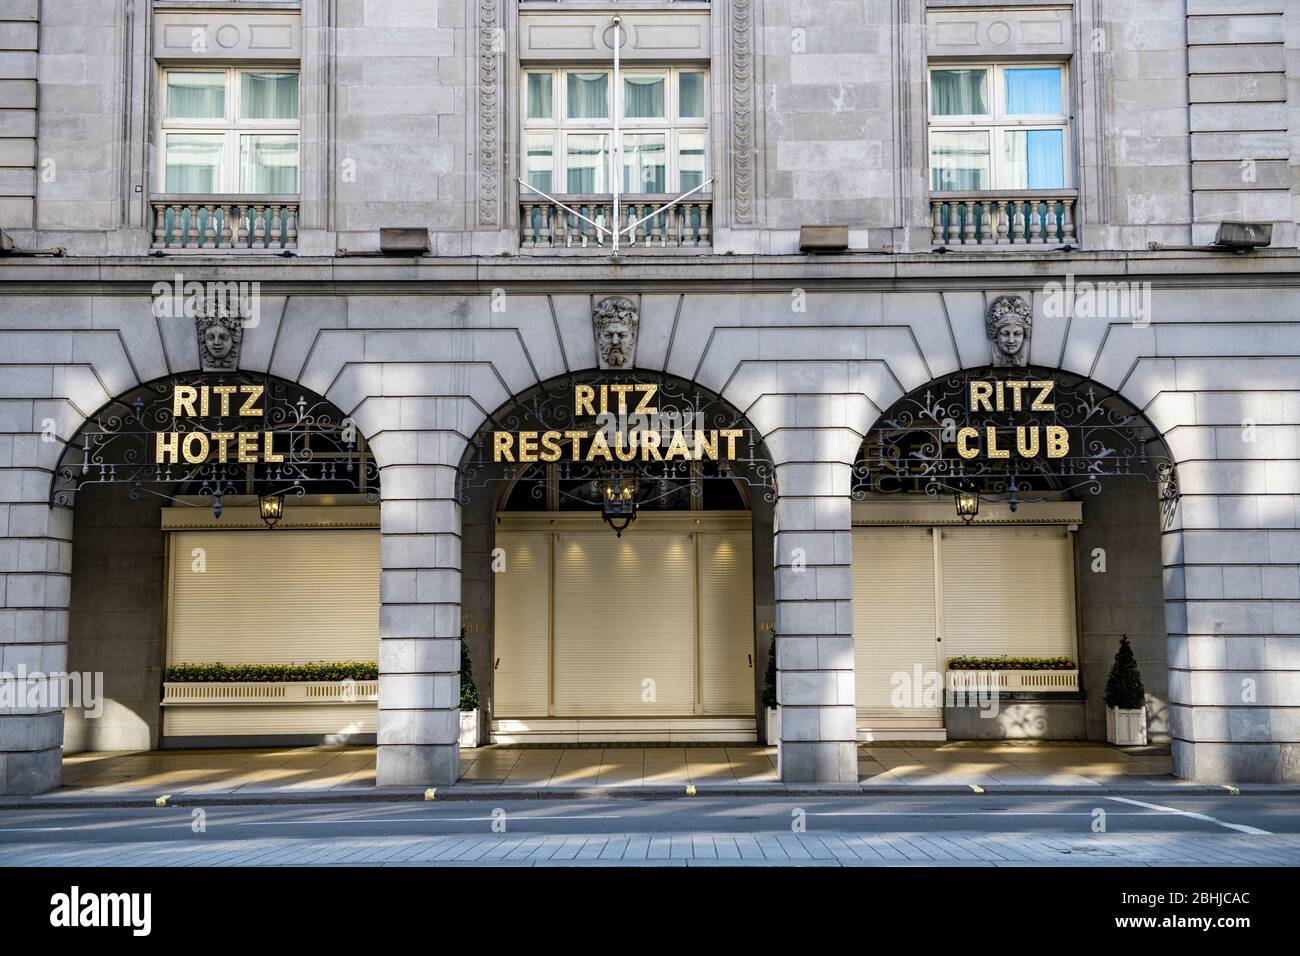 Shutters down on a closed Ritz Hotel during the Coronavirus lockdown of 2020 Stock Photo